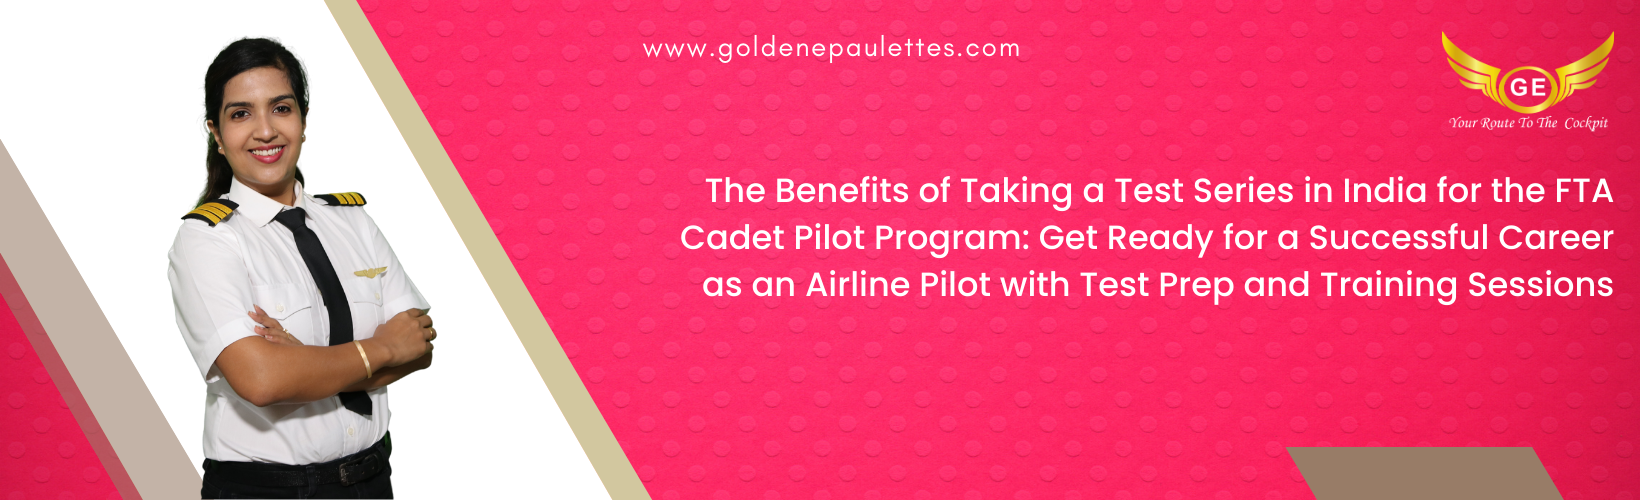 The Benefits of Taking a Test Series in India for the FTA Cadet Pilot Program